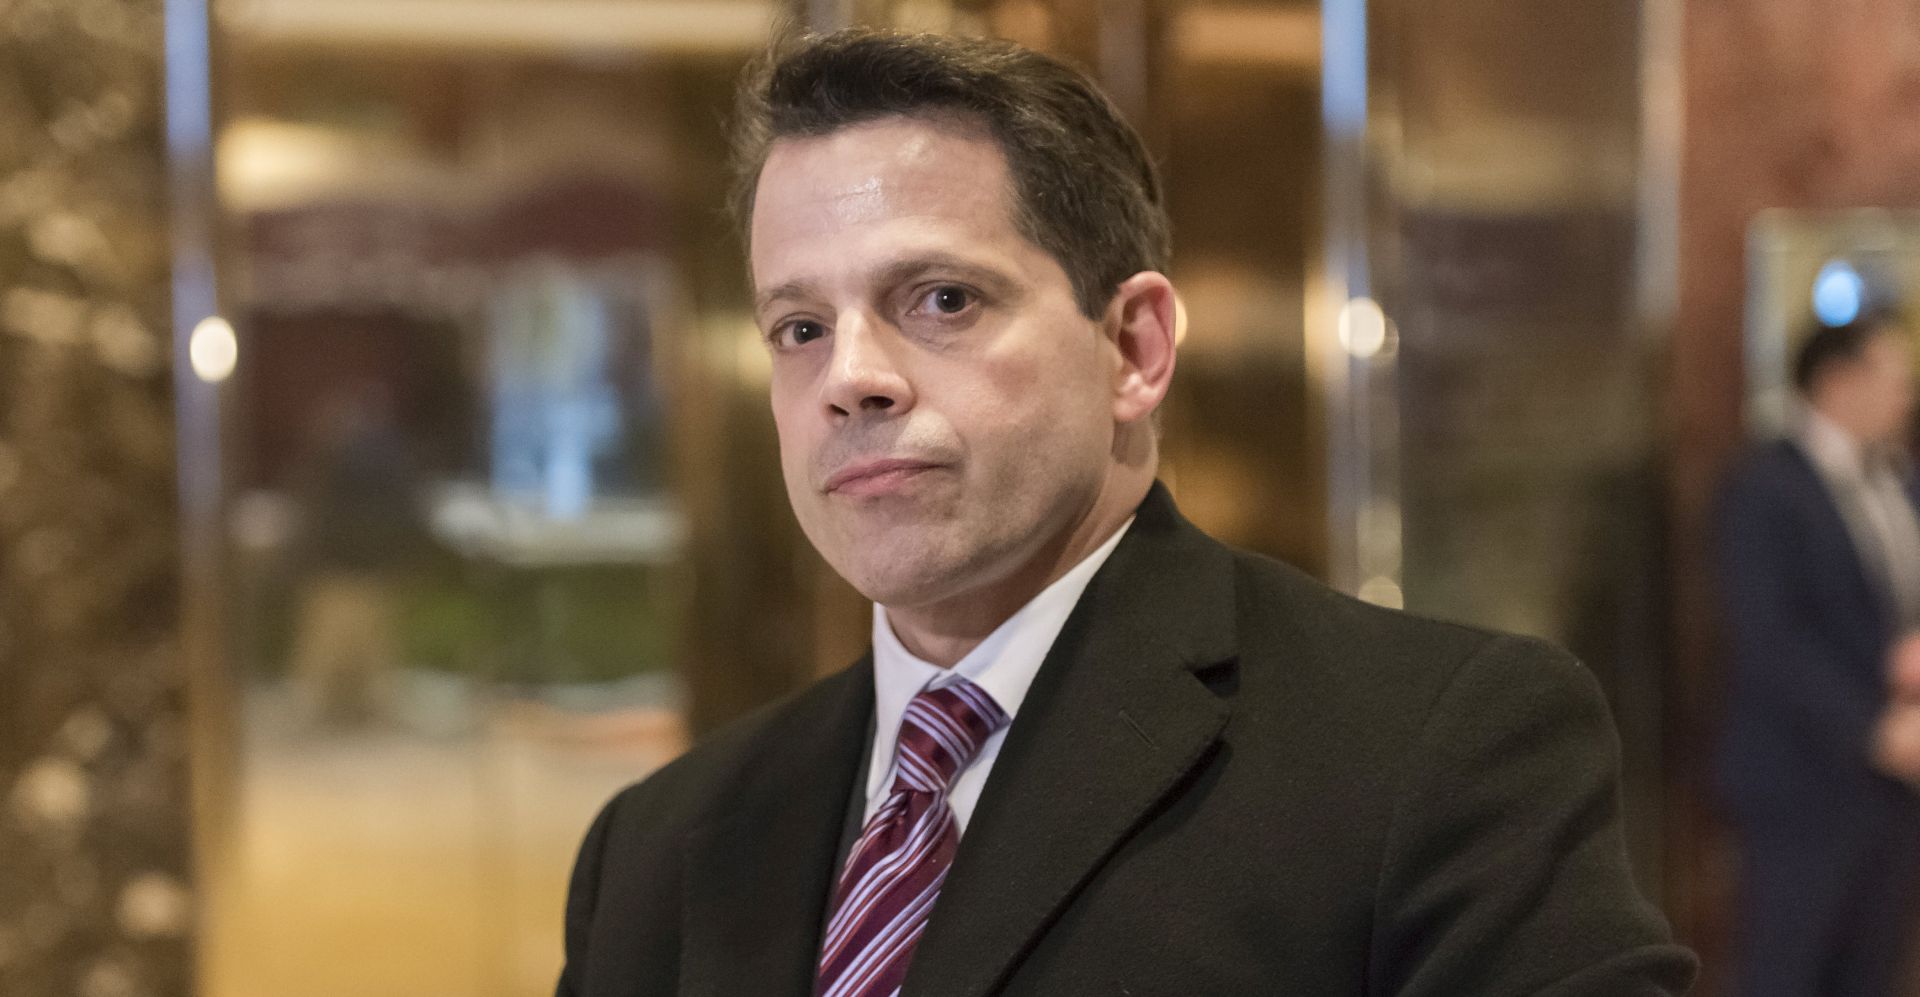 epa06102010 (FILE) Anthony Scaramucci speaks with members of the press in the lobby of Trump Tower in New York, New York, USA, 13 January 2017 (reissued 21 July 2017). According to media reports on 21 July 2017 Scaramucci has accepted the position of White House communications director.  EPA/ALBIN LOHR-JONES / POOL